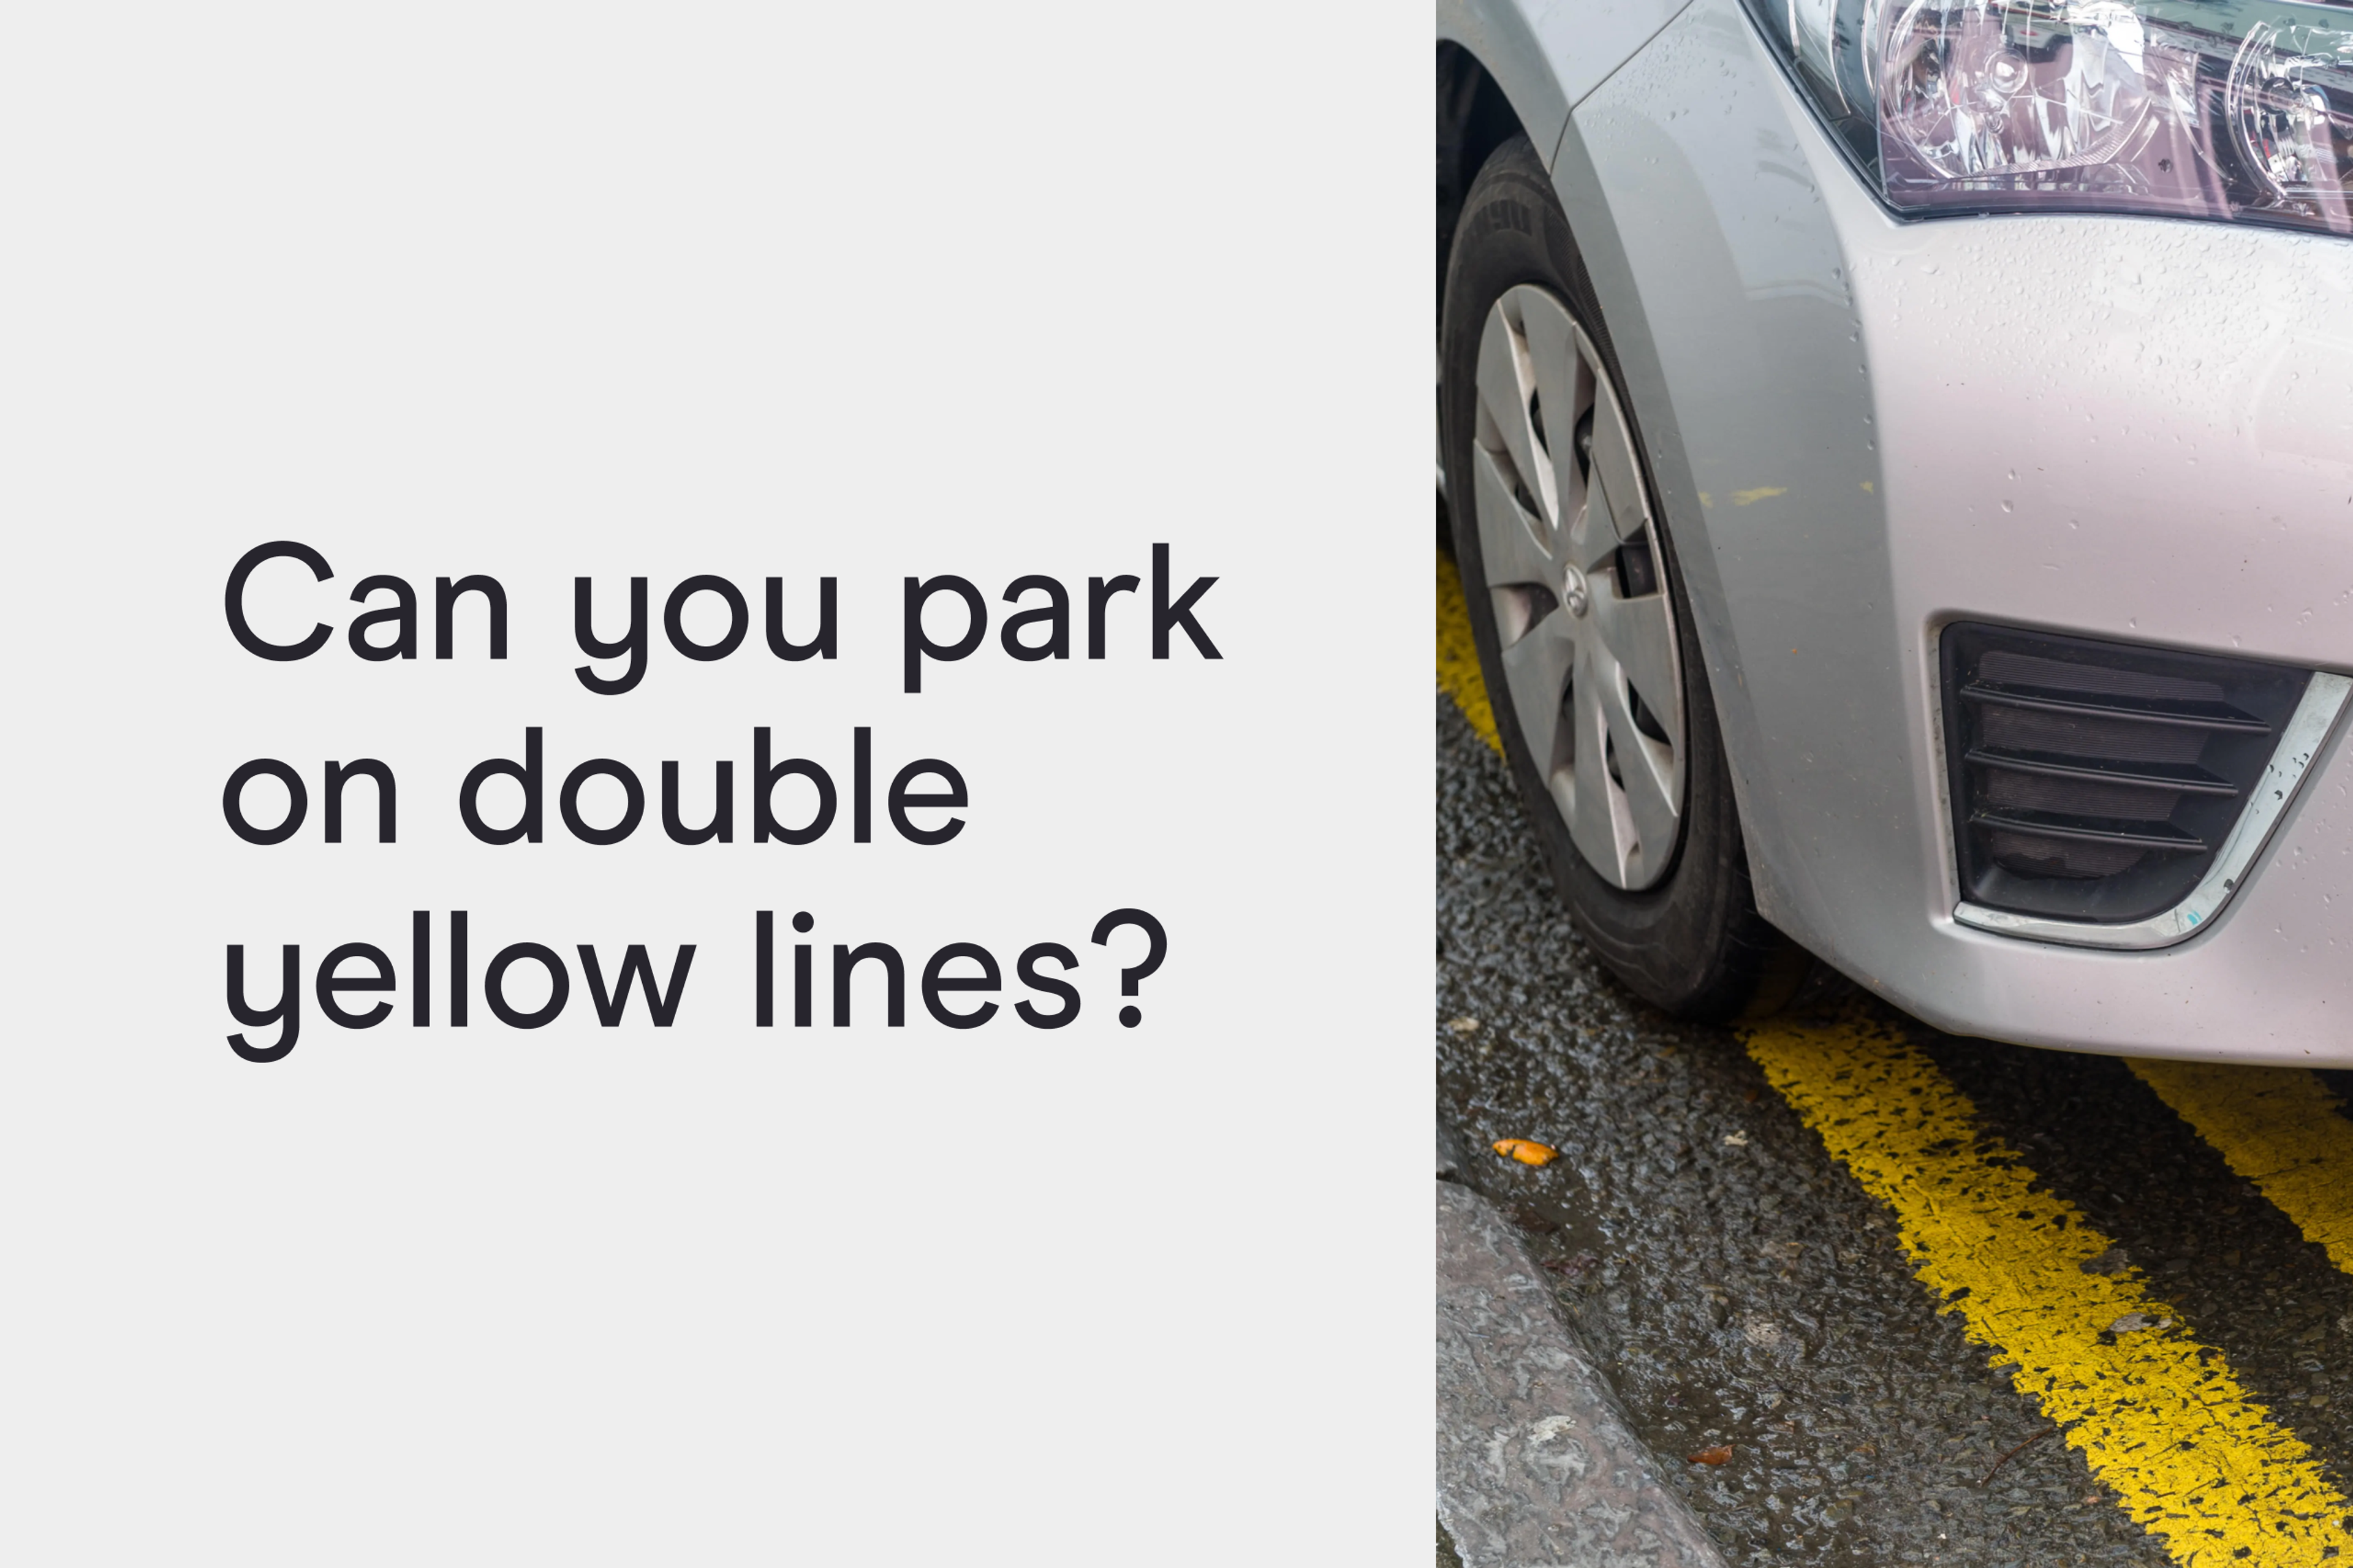 Can you park on double yellow lines?